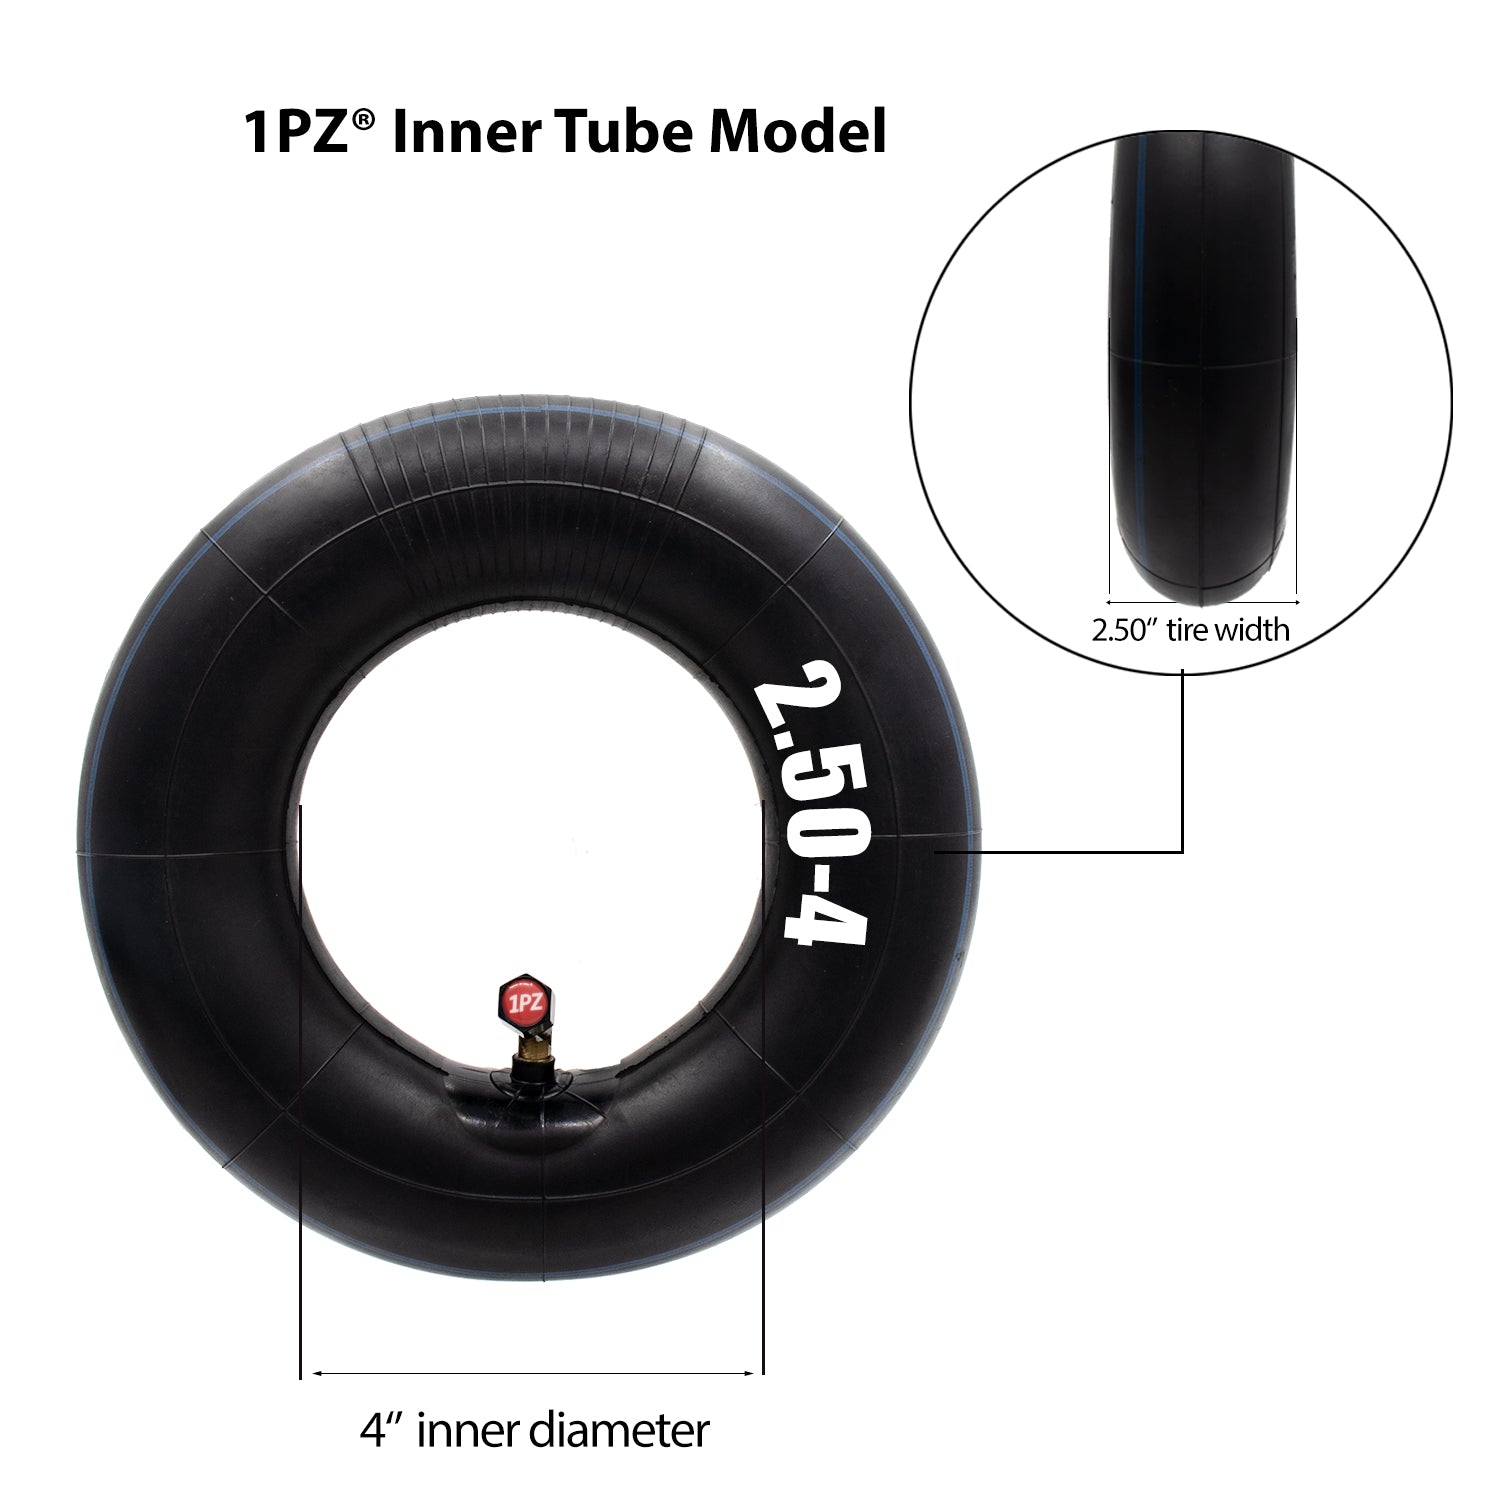 1PZ Set of 2.80/2.50-4" Tire & Inner Tube with TR87 Bent Valve Stem for Utility Cart Dollies Hand Truck Wheelbarrows Trolly Lawn Mowers